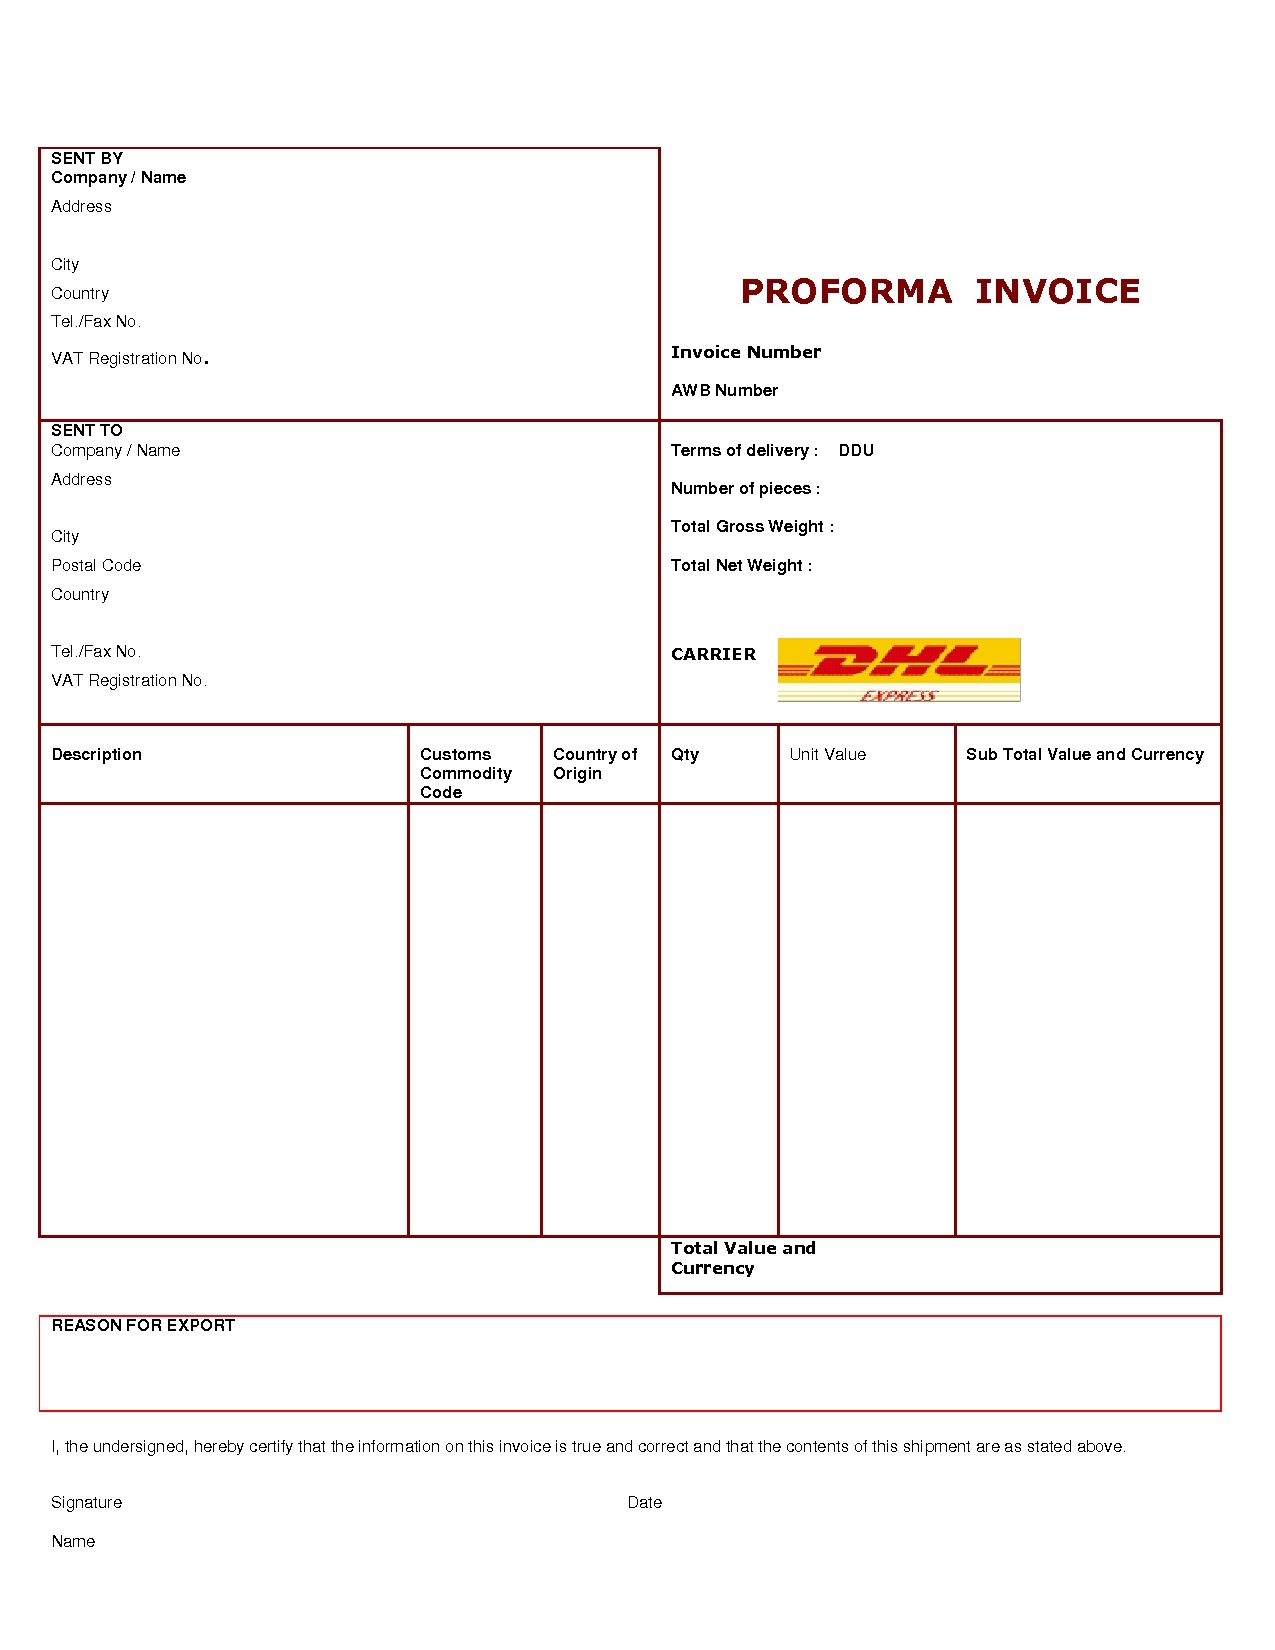 dhl proforma invoice template invoice template free 2016 meaning proforma invoice